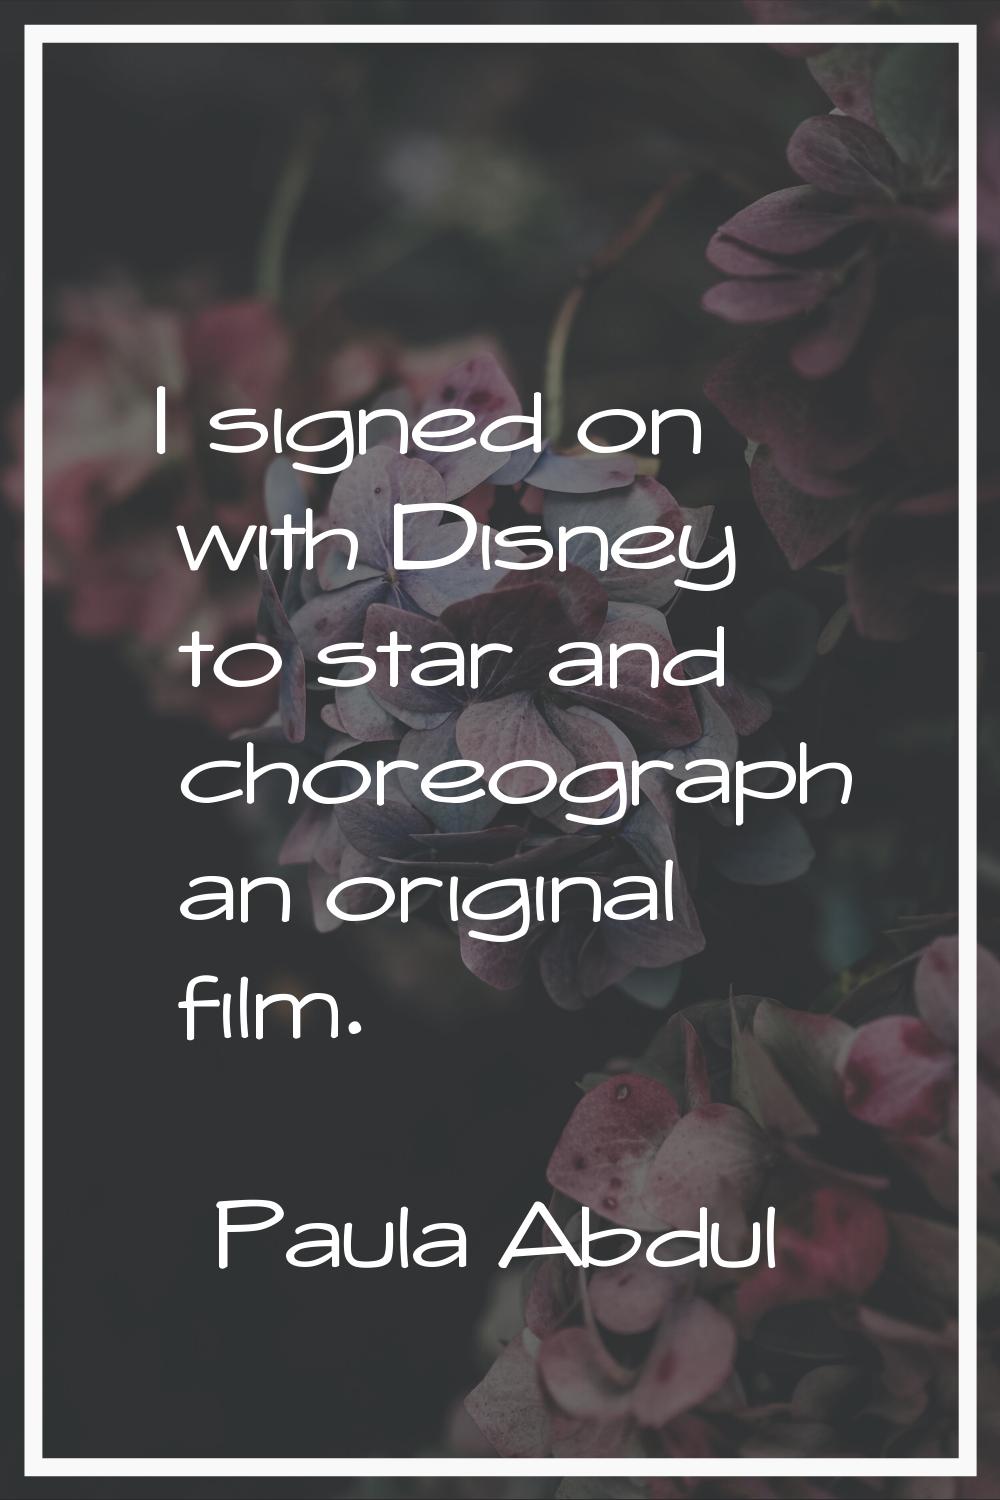 I signed on with Disney to star and choreograph an original film.